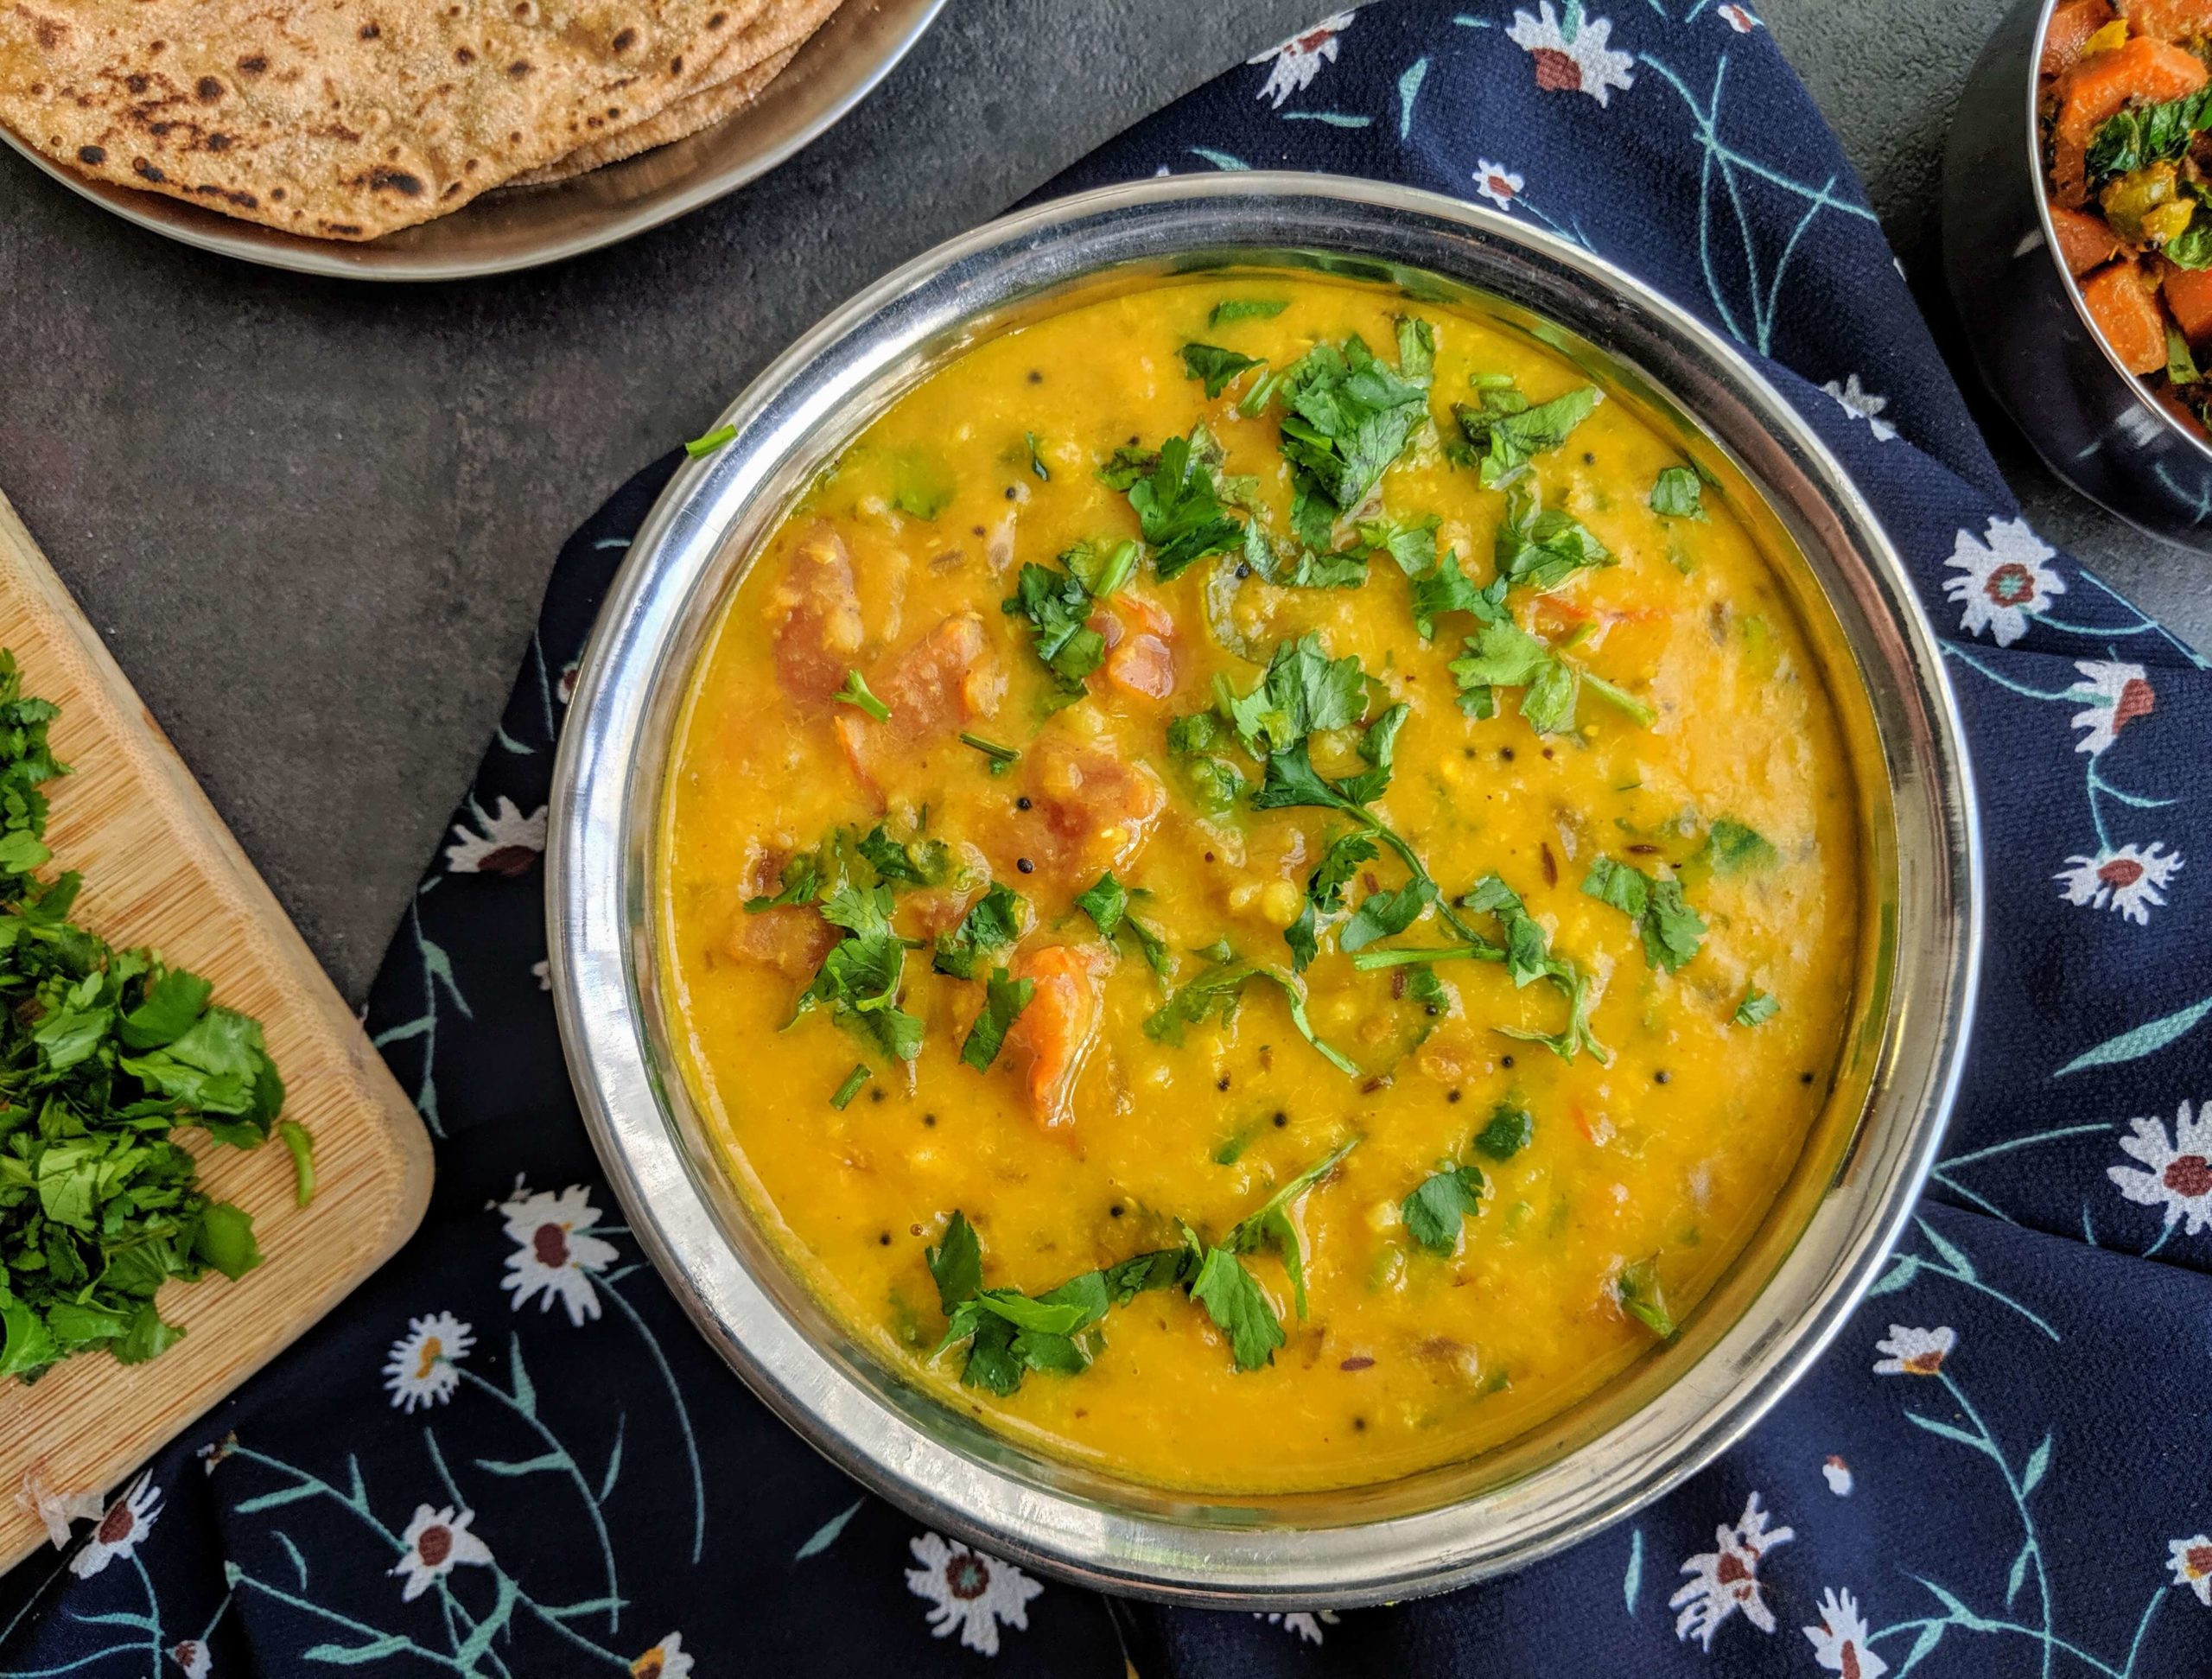 Moong Dal Tadka is a simple Indian dish made from yellow moong lentils cooked with a tempering made of onion, tomato and spices.